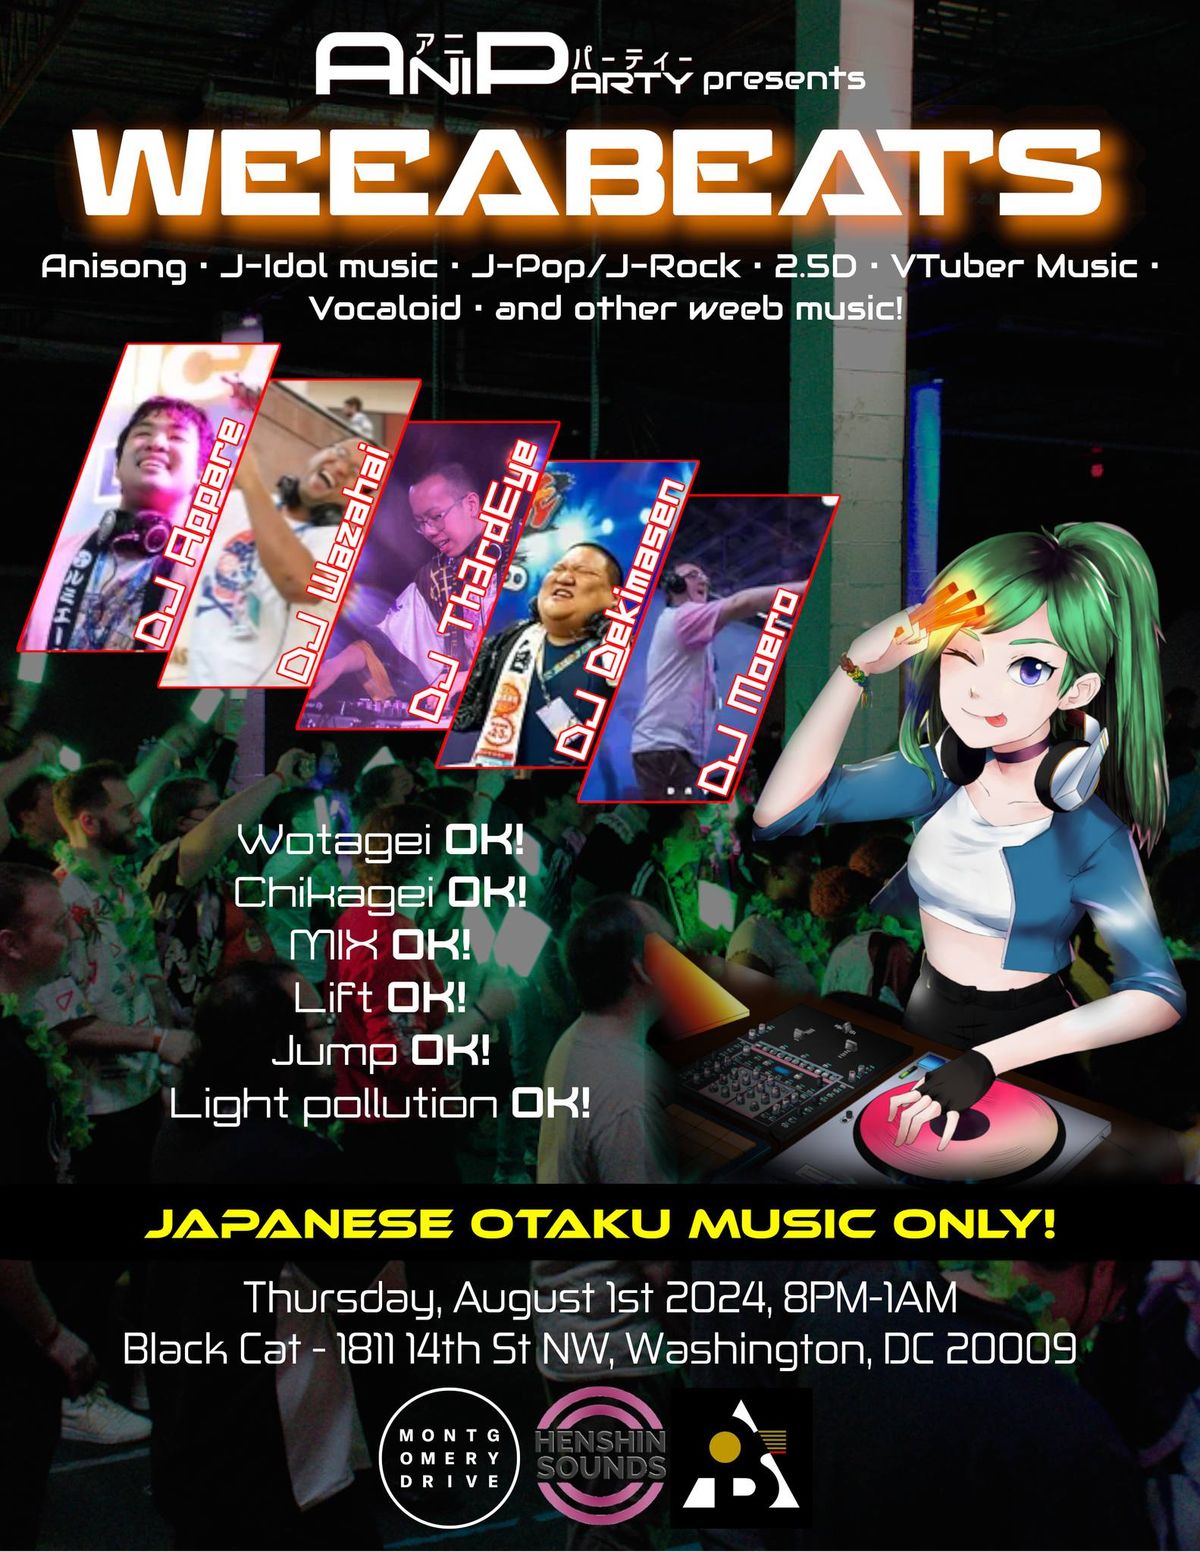 Weeabeats presented by Aniparty, Montgomery Drive, and OTS productions